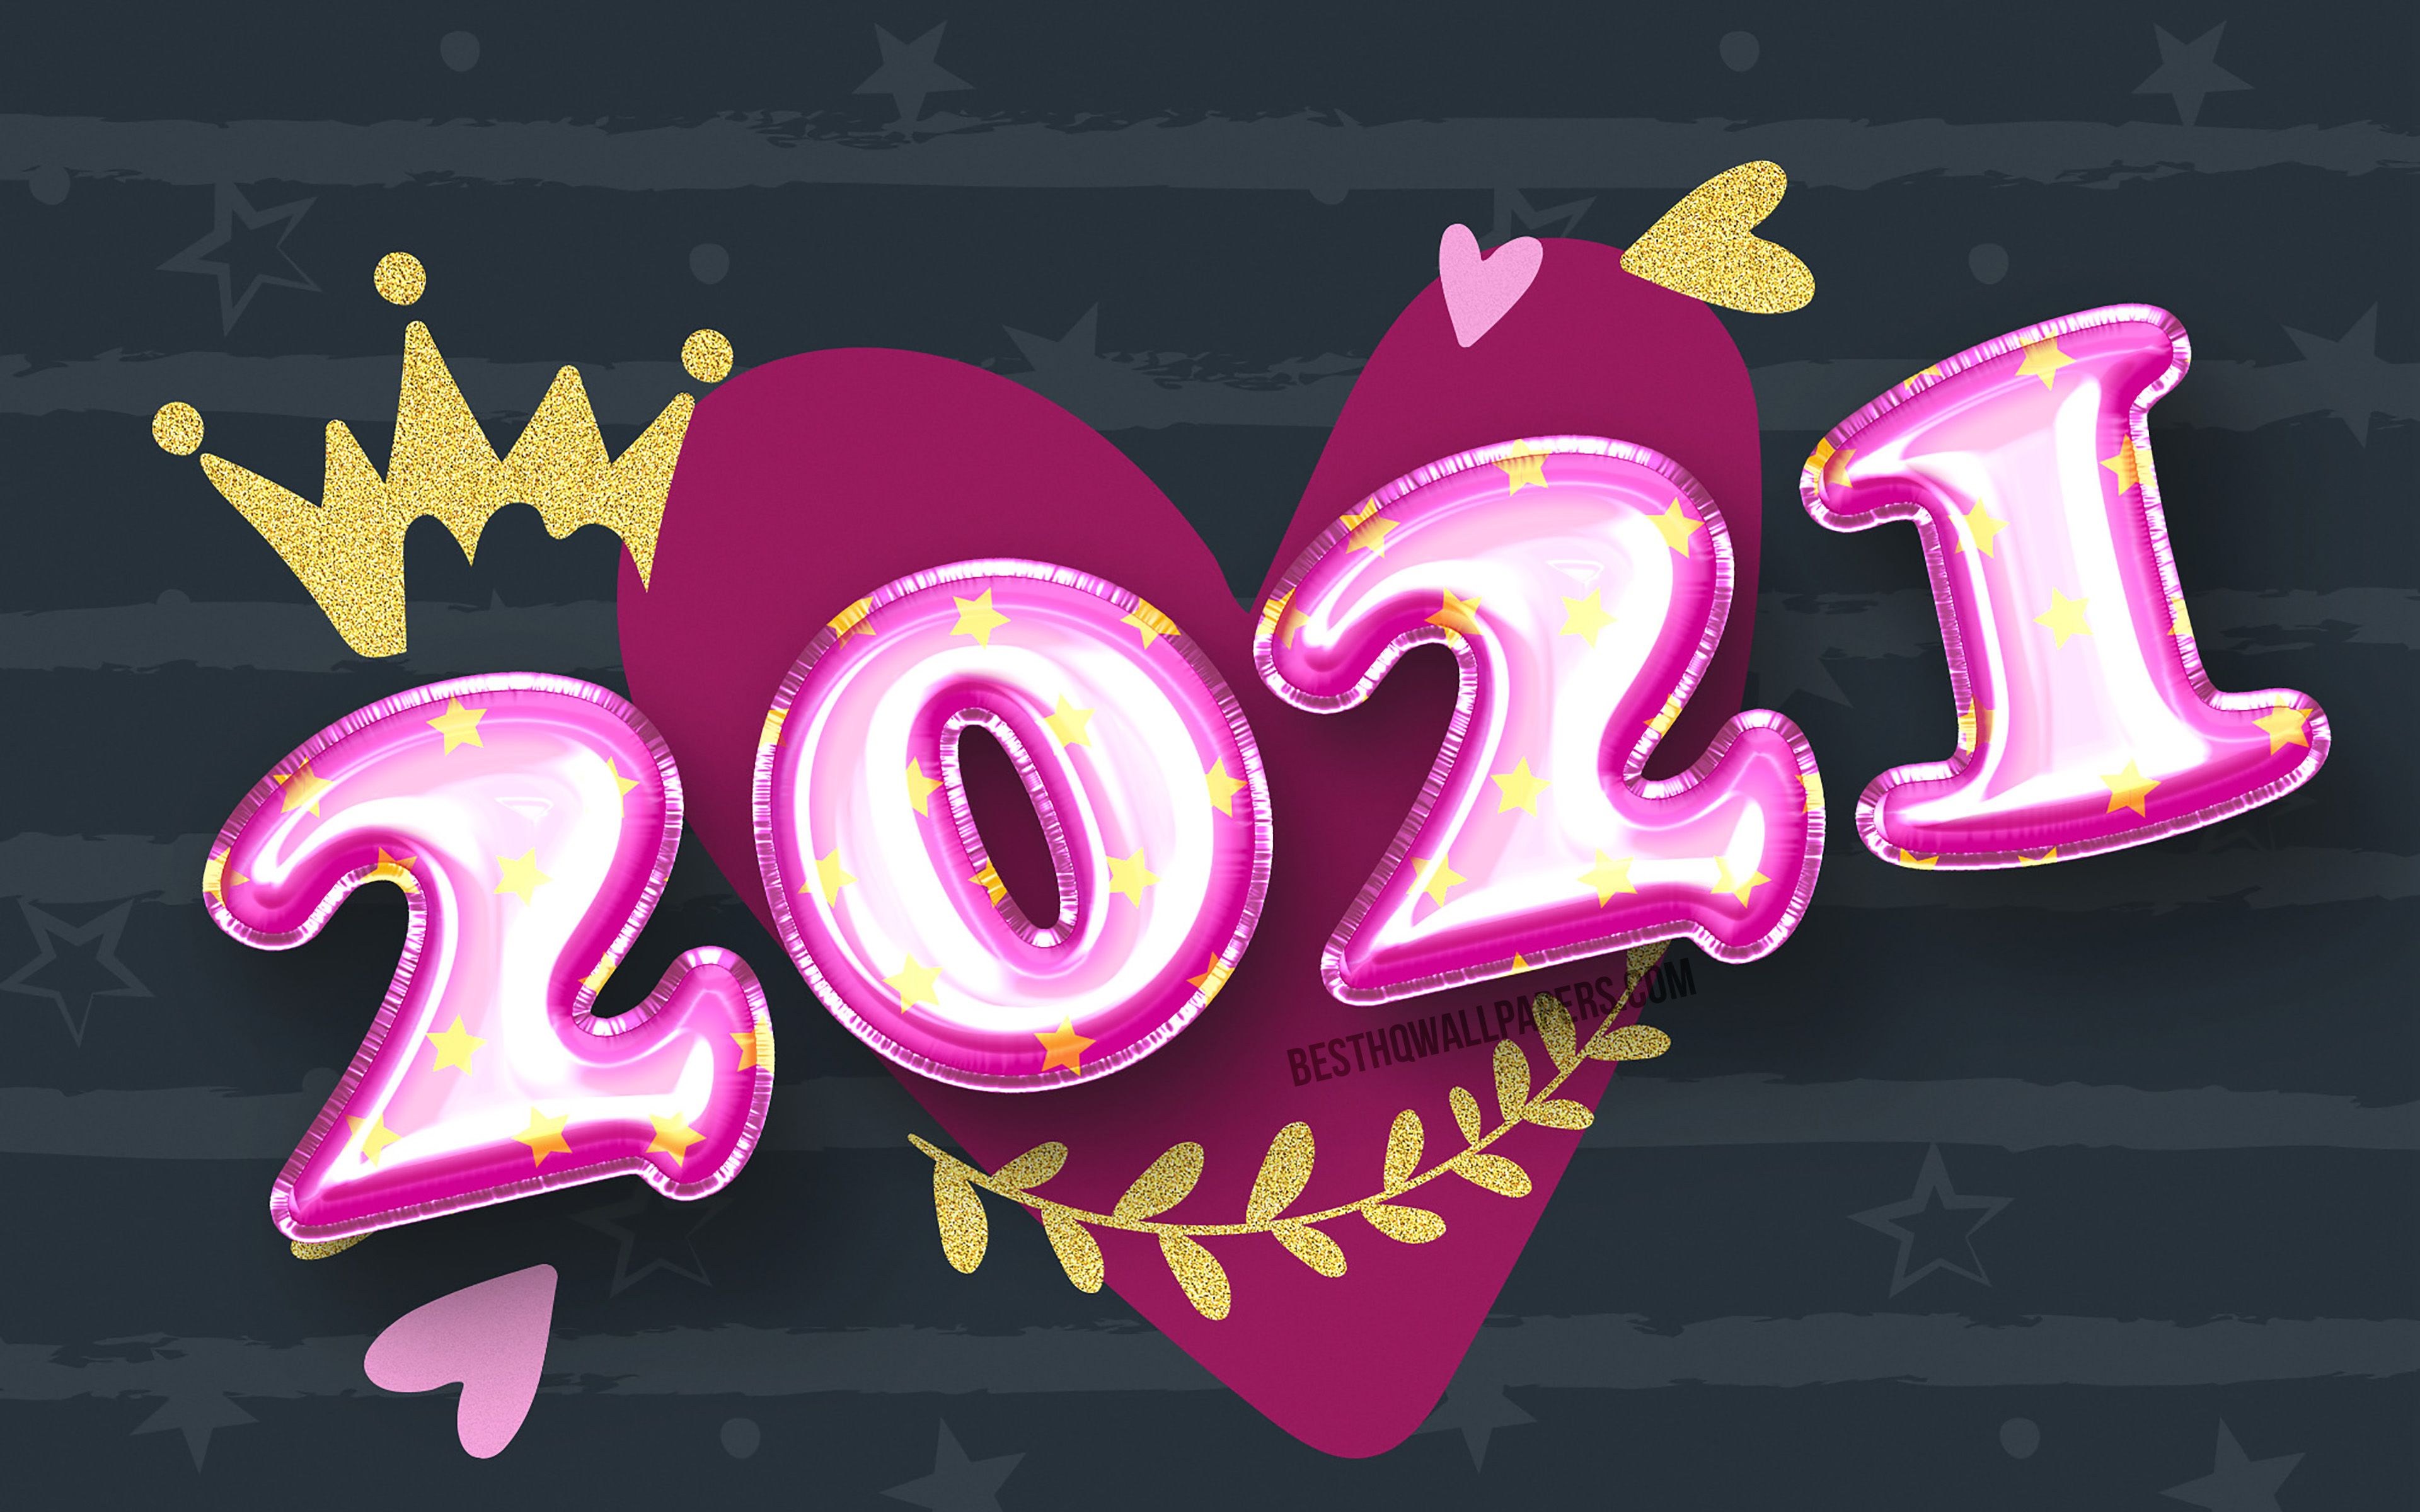 Download wallpapers 4k, Happy New Year 2021, purple balloons digits, 2021 concepts, 2021 year digits, 2021 new year, 2021 on gray background, 2021 with heart for desktop with resolution 3840x2400. High Quality HD pictures wallpapers